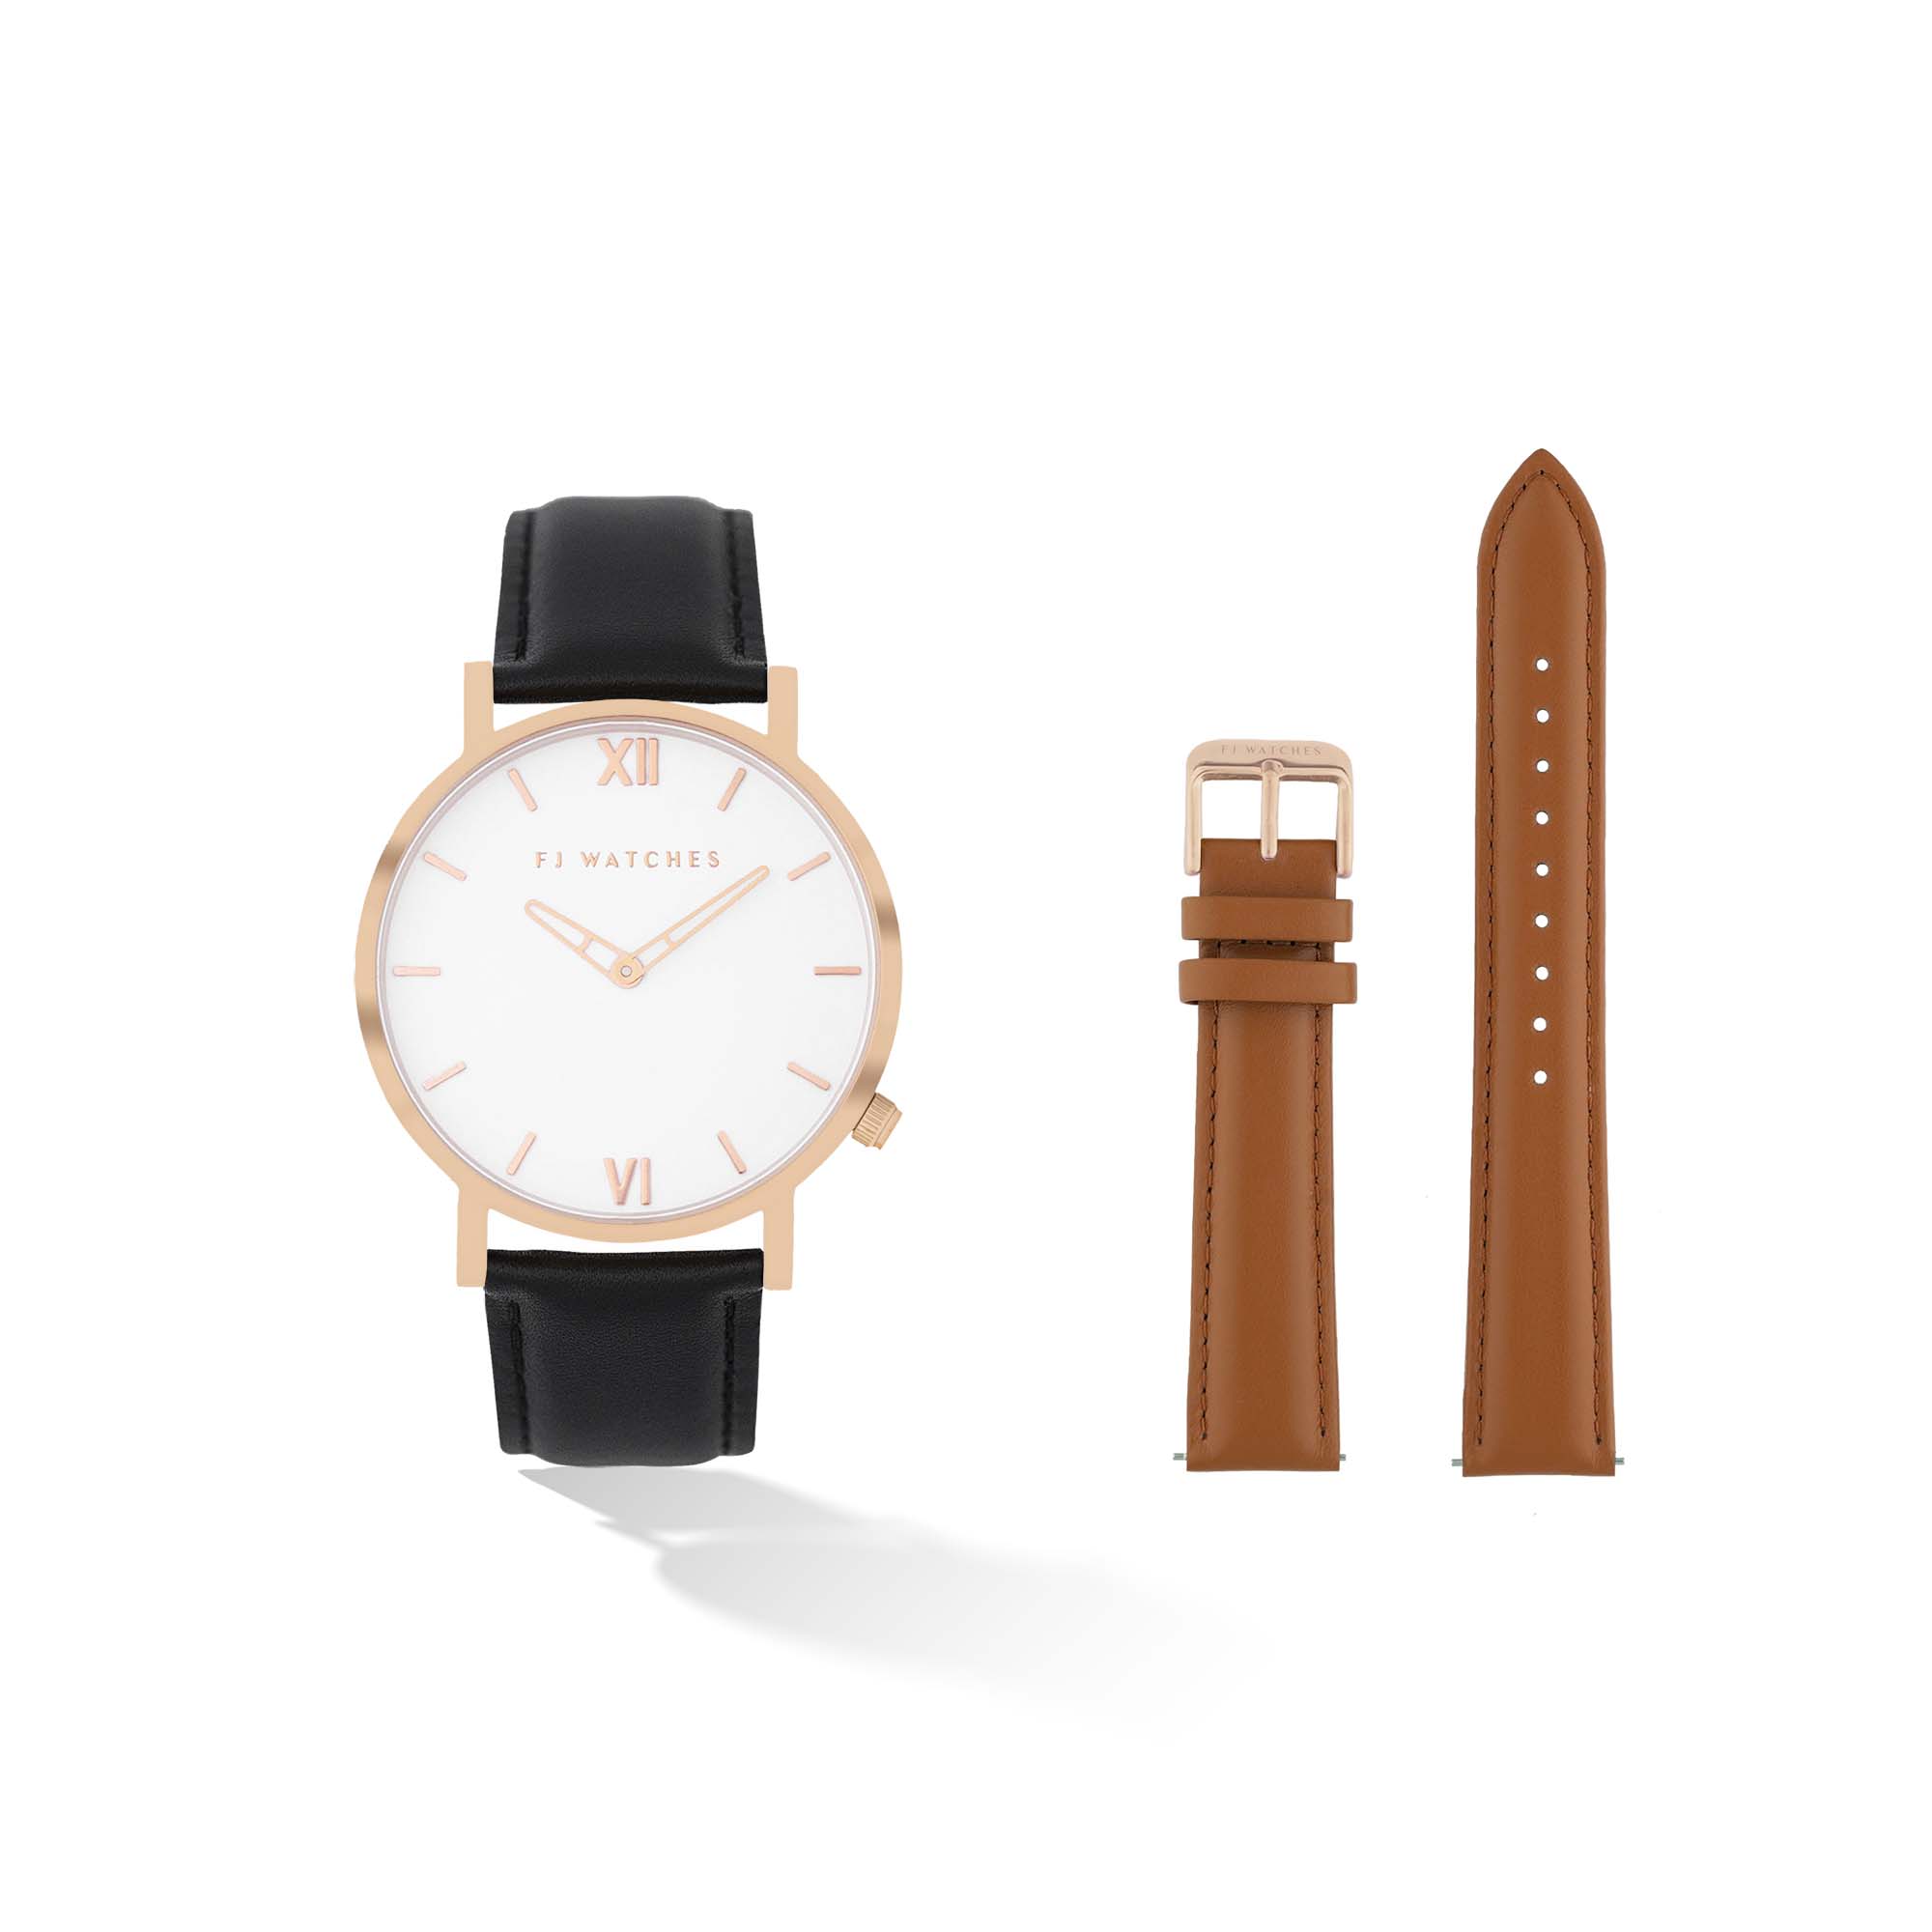 Discover the Golden Sun set, a 36mm men and women watch from Five Jwlry. Equipped with a minimalist white and rose gold dial. In this special edition, this watch comes with two leathers, one black leather and one tan. The perfect gift!